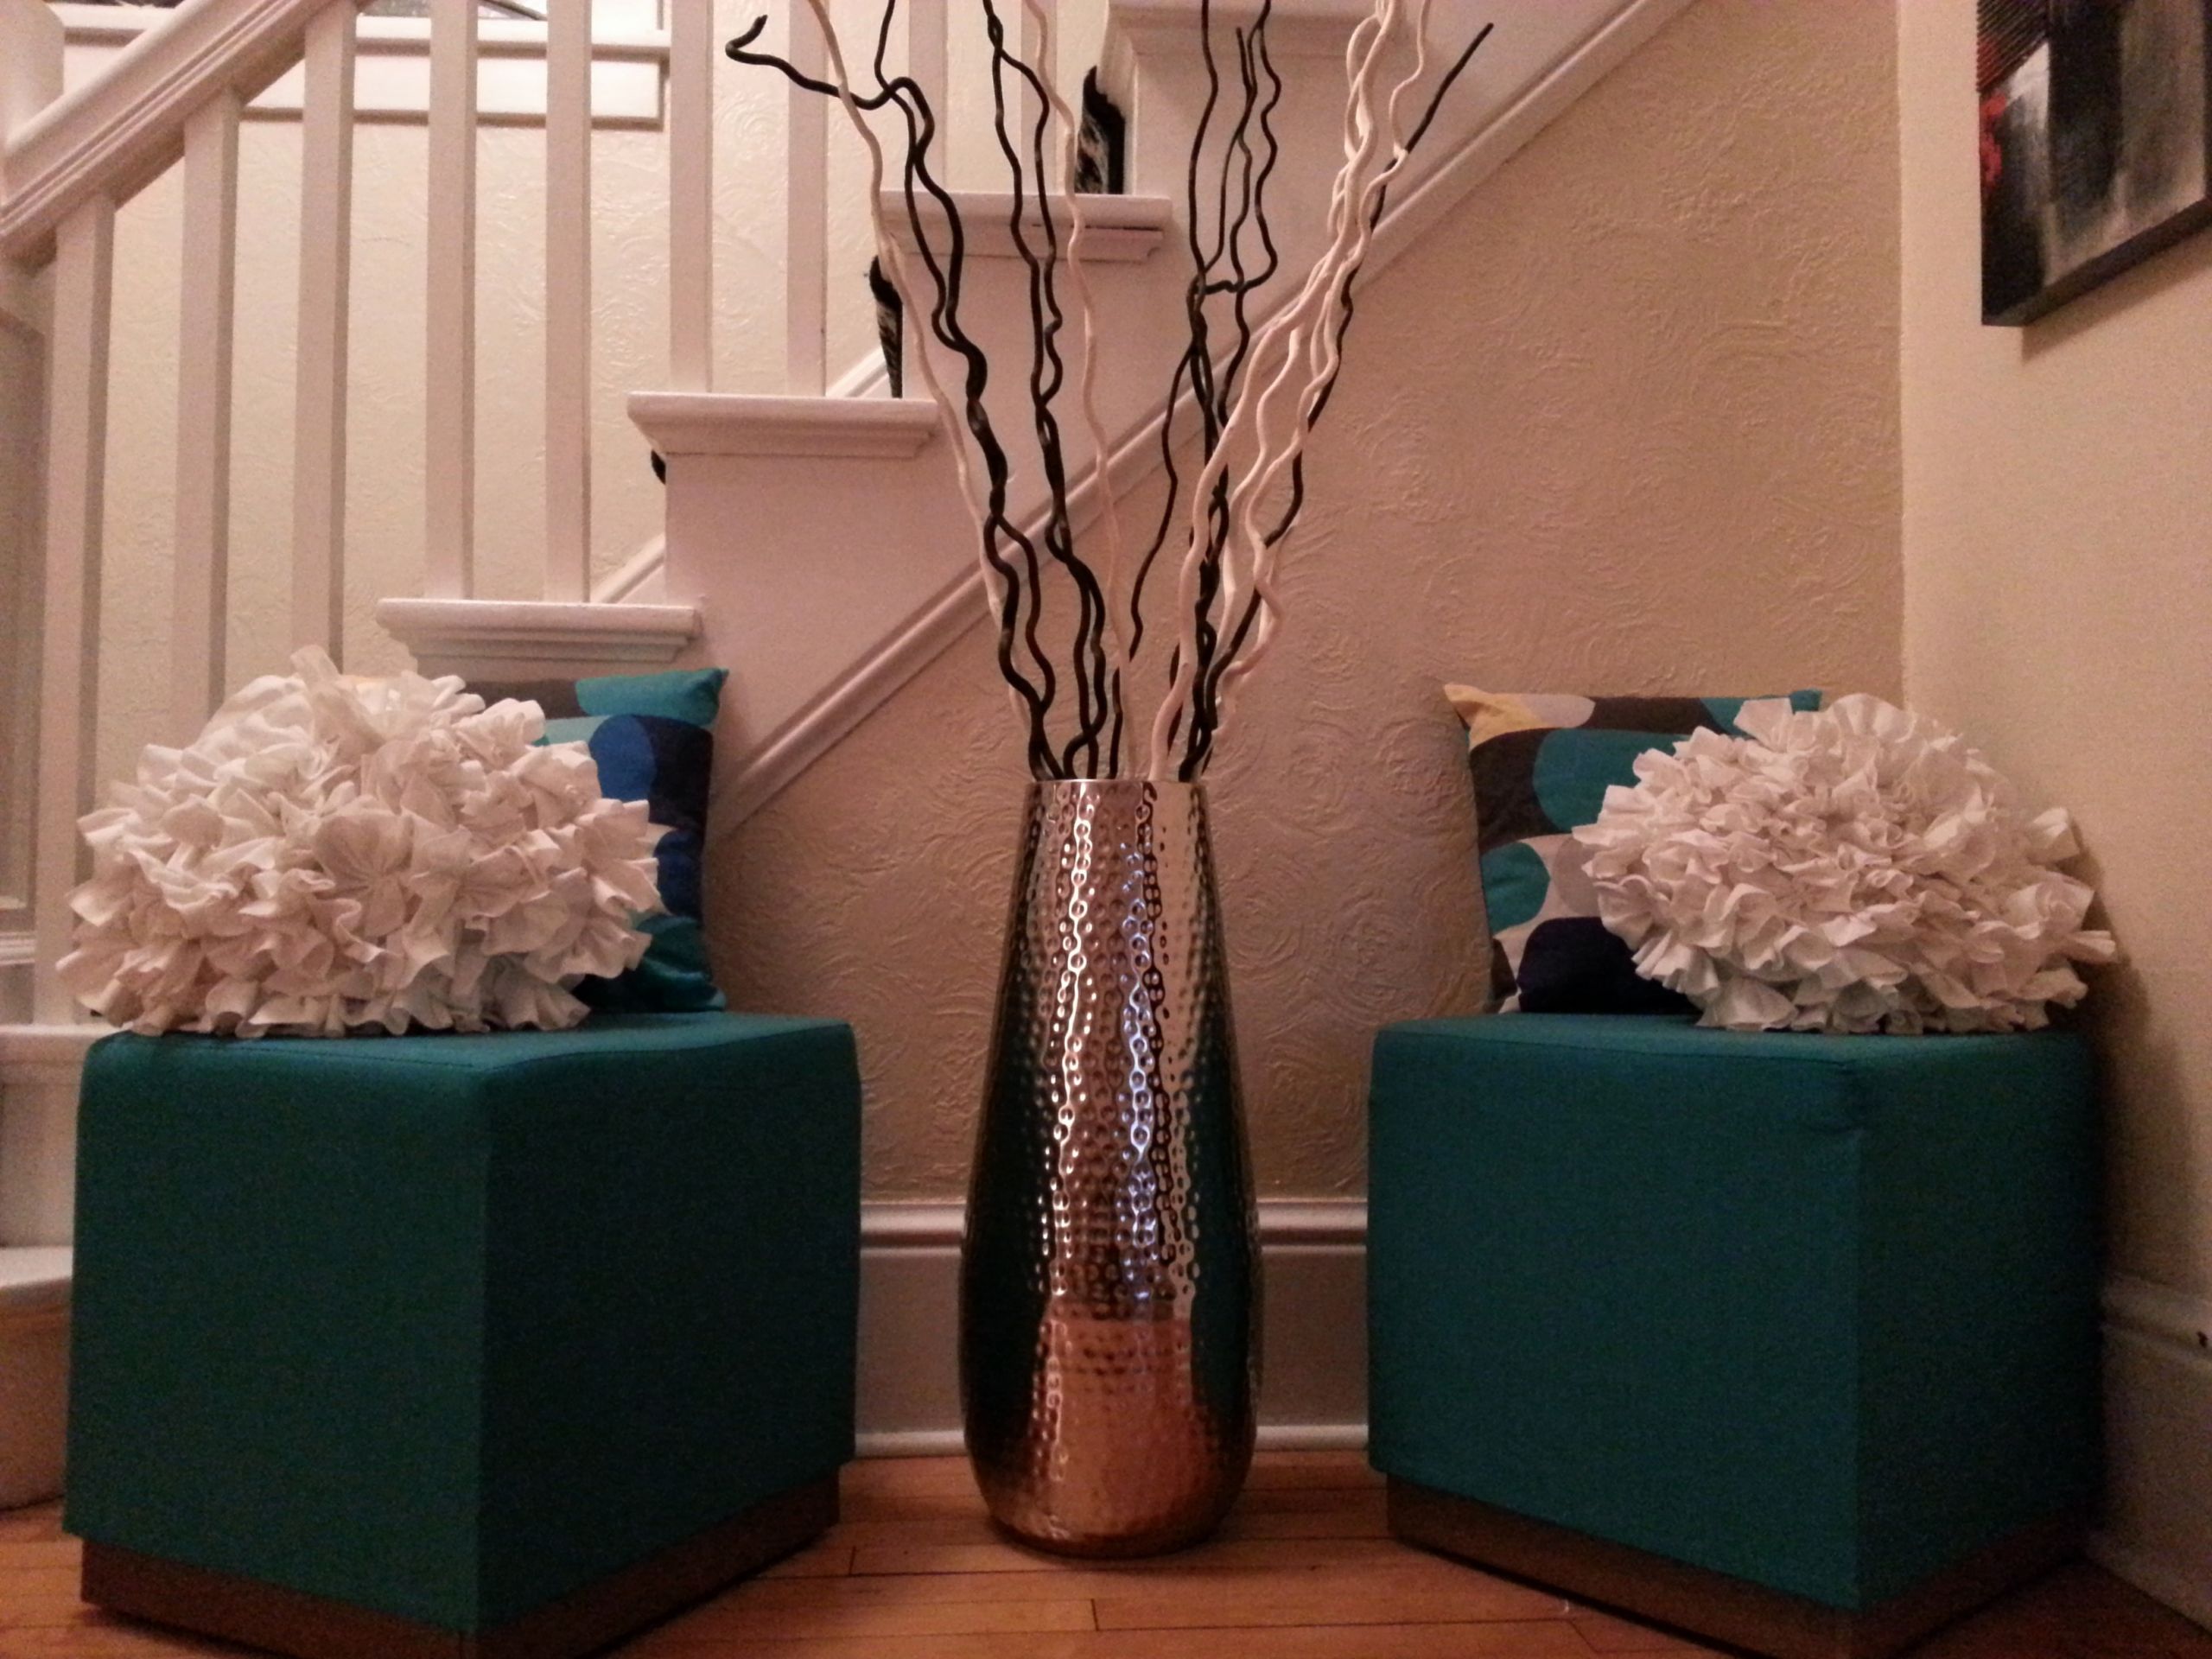 Decorative Vases For Living Room
 30 Great Mirrored Floor Vase